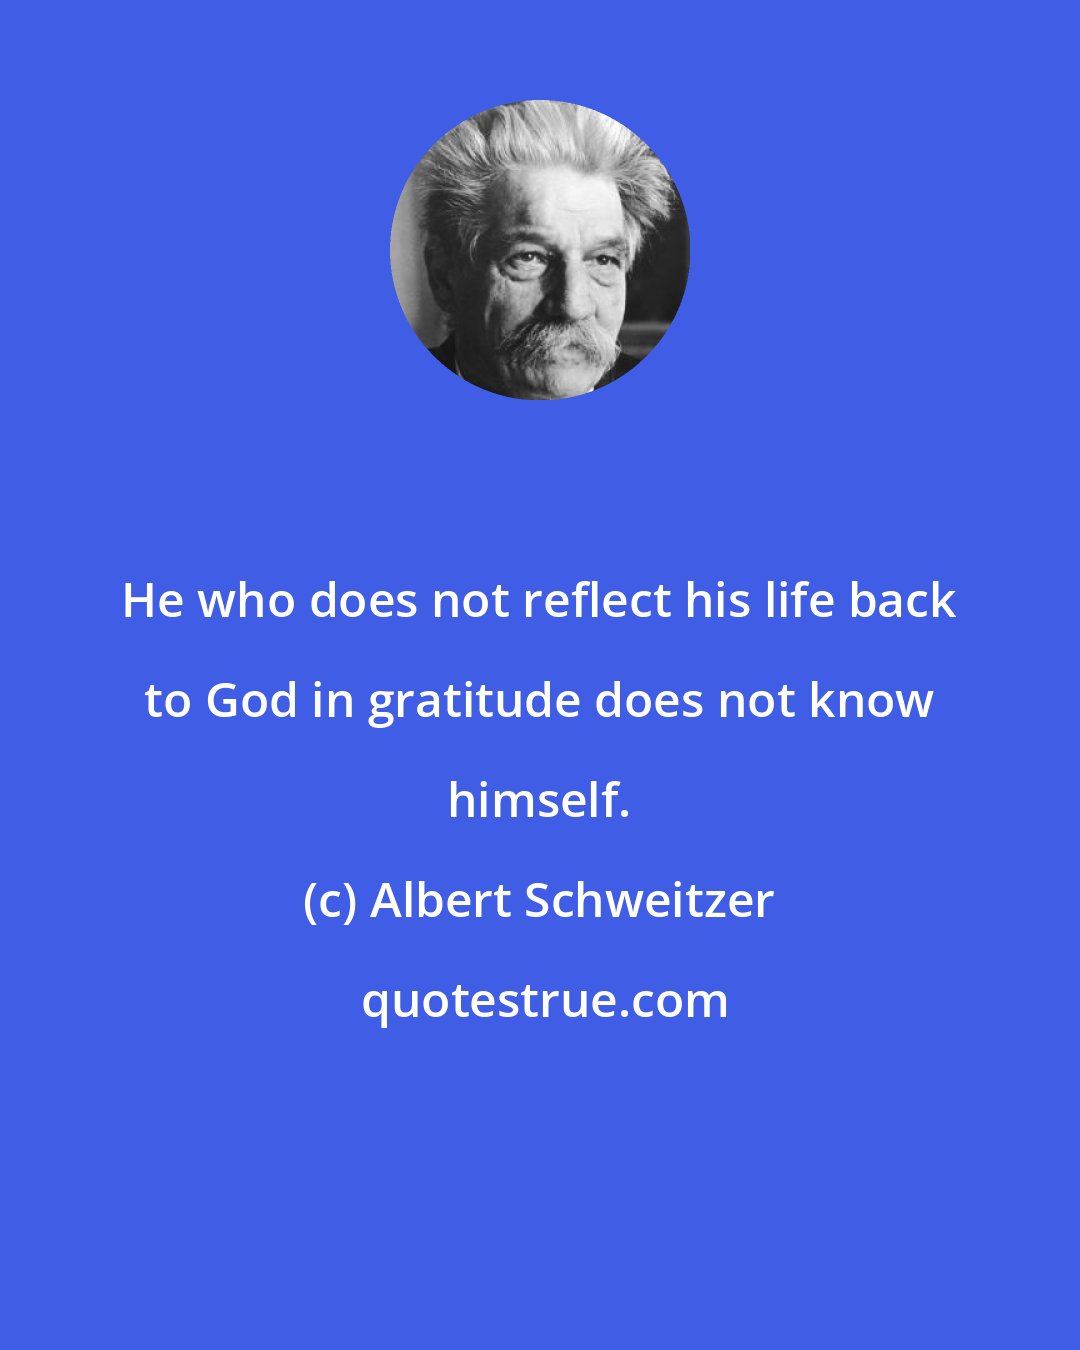 Albert Schweitzer: He who does not reflect his life back to God in gratitude does not know himself.